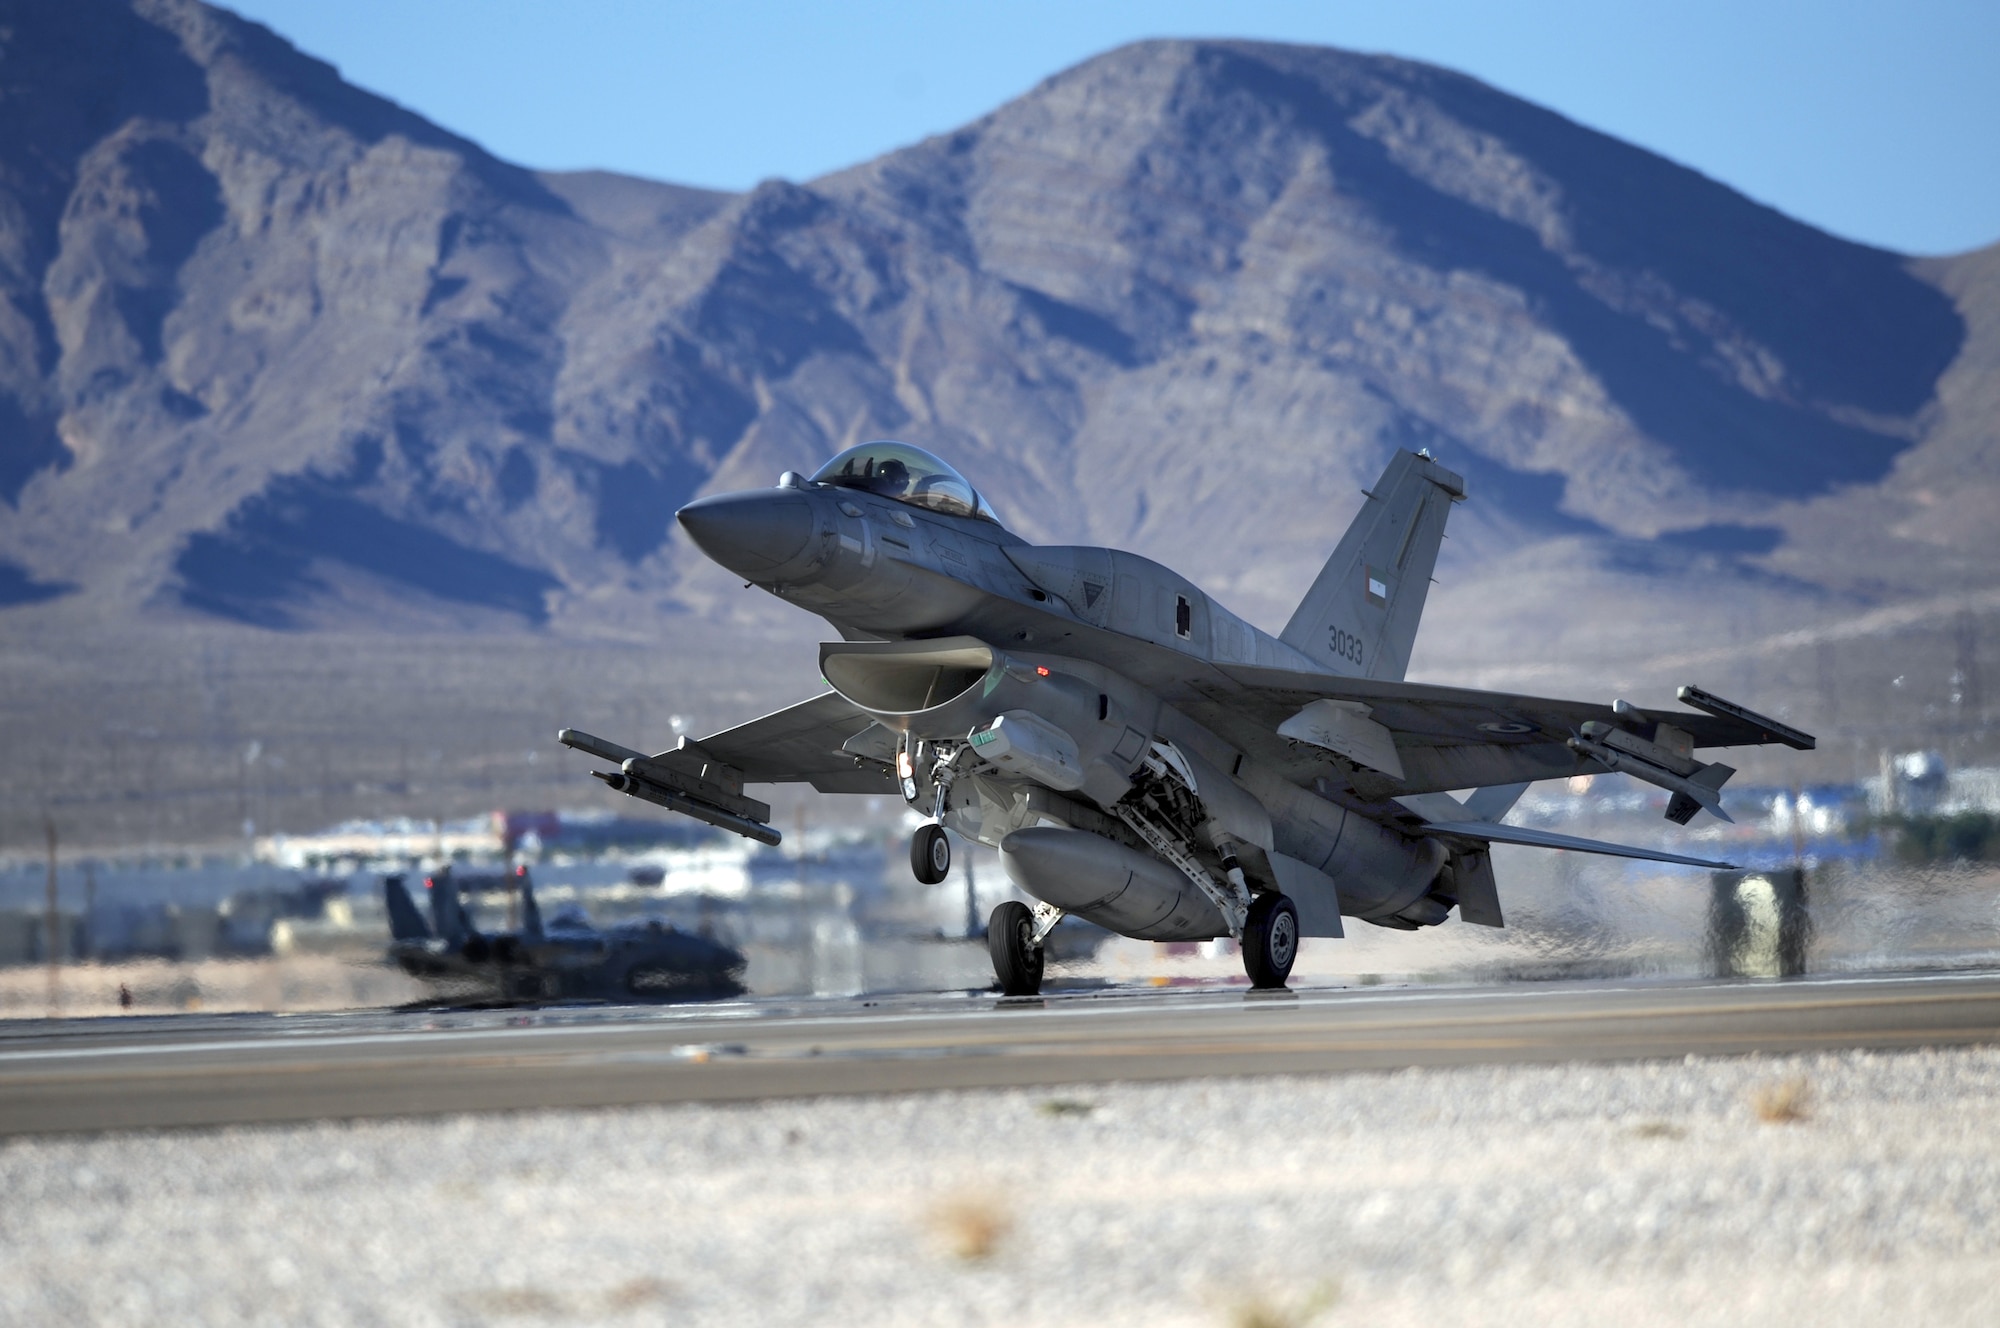 An F-16E from the United Arab Emirates lands after a training mission during Red Flag Aug. 26, 2009, at Nellis Air Force Base, Nev.  This is the first time the nation has participated in Red Flag, a realistic two-week air combat training exercise conducted over the 15,000-square-mile Nevada Test and Training Range north of Las Vegas.  The exercise ends Sept. 4. (U. S. Air Force photo/Tech. Sgt. Michael R. Holzworth)